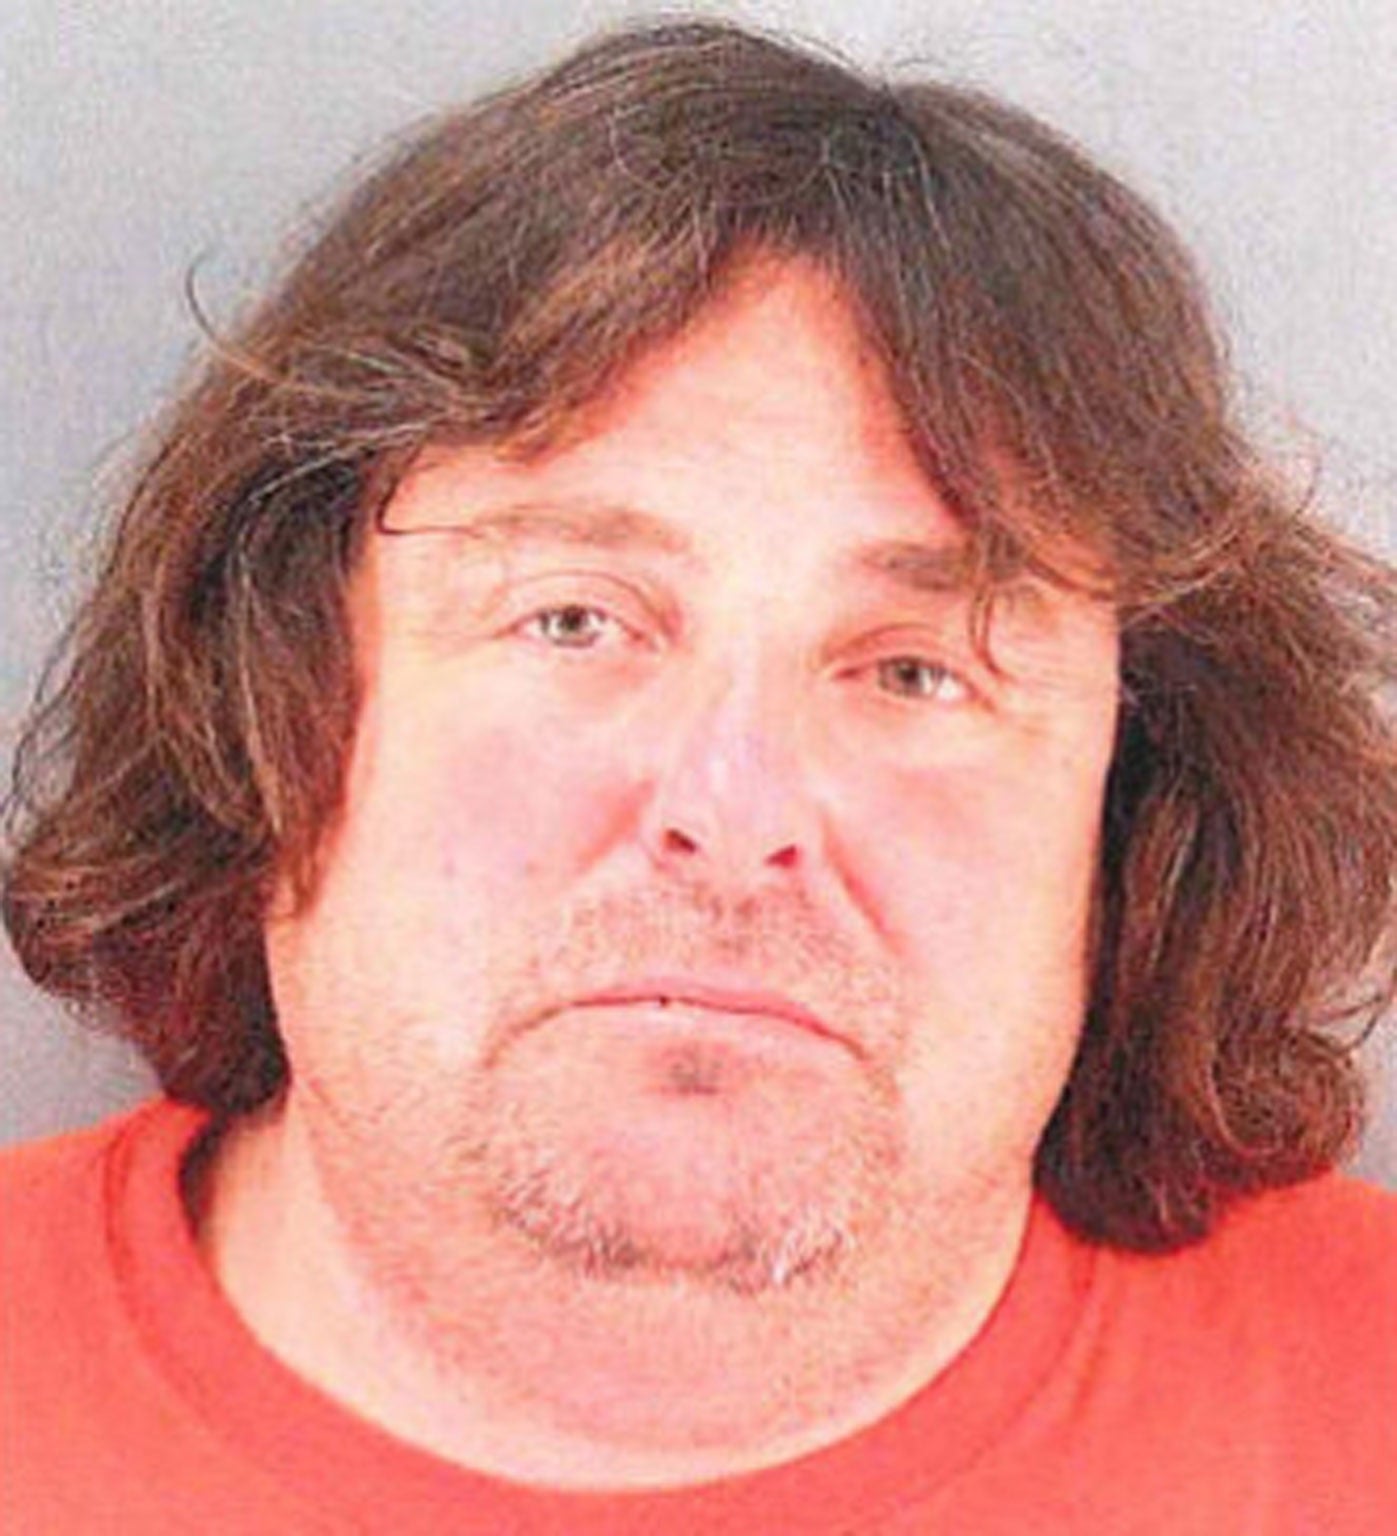 Dan Sandler, the homeless man accused of trying to bribe the Girl Scouts